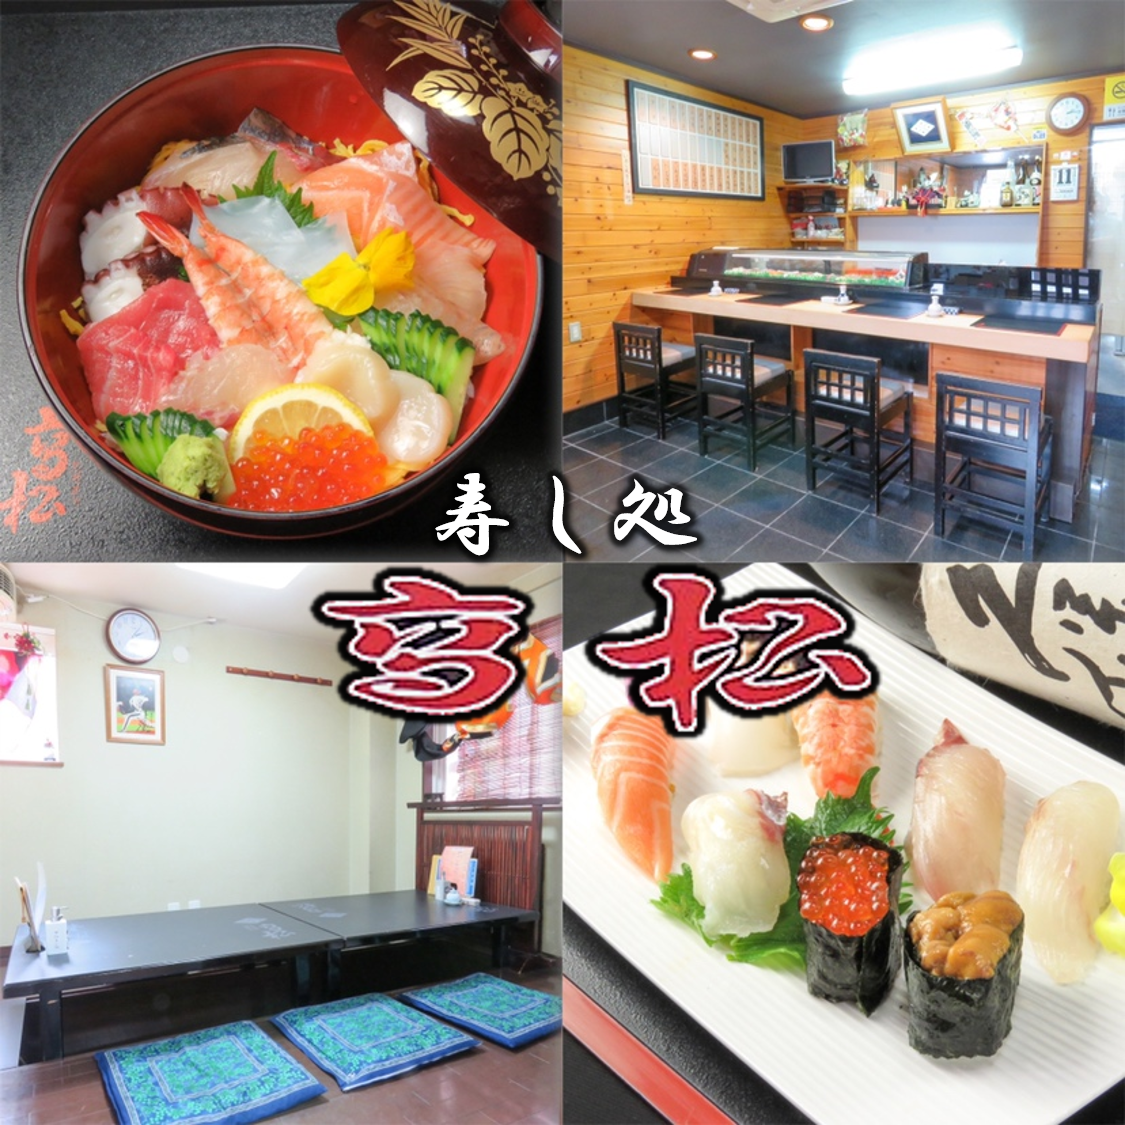 We offer fresh fish that we purchase every day at a reasonable price! A long-established sushi restaurant loved by the locals ◇